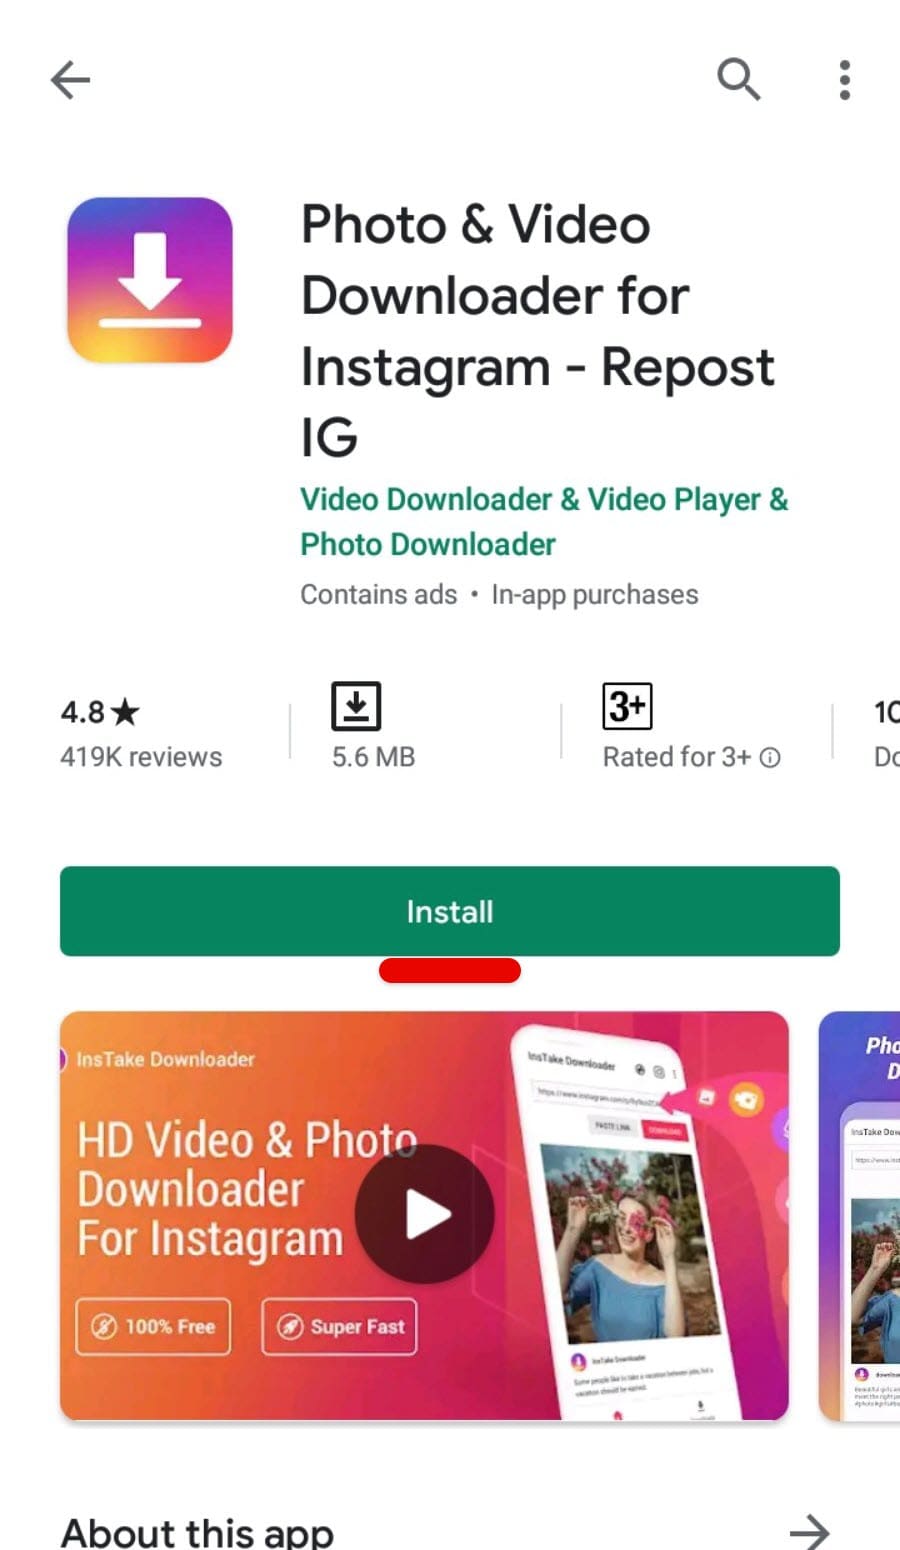 How To Download Instagram Photos & Videos On Android - GEEKrar